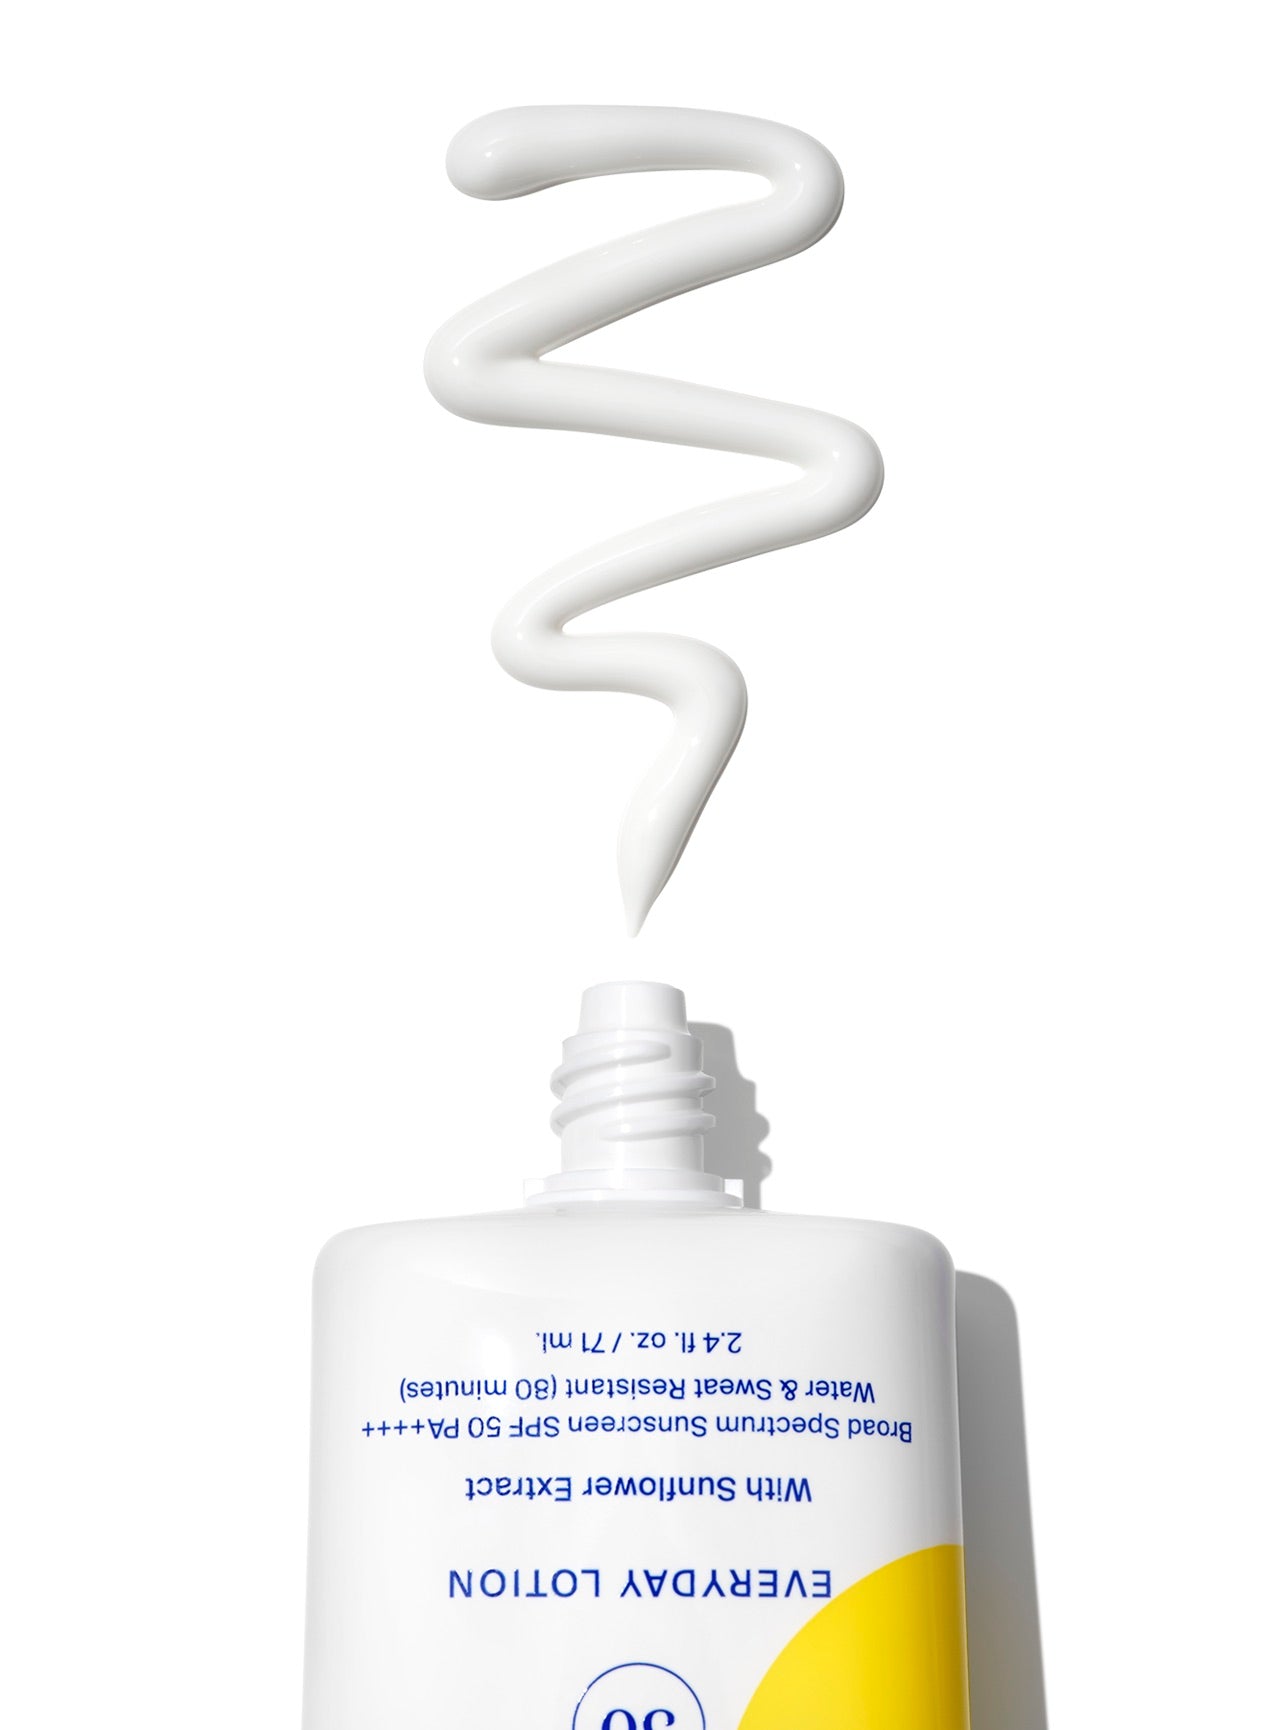 PLAY Everyday Lotion SPF 50 With Sunflower Extract